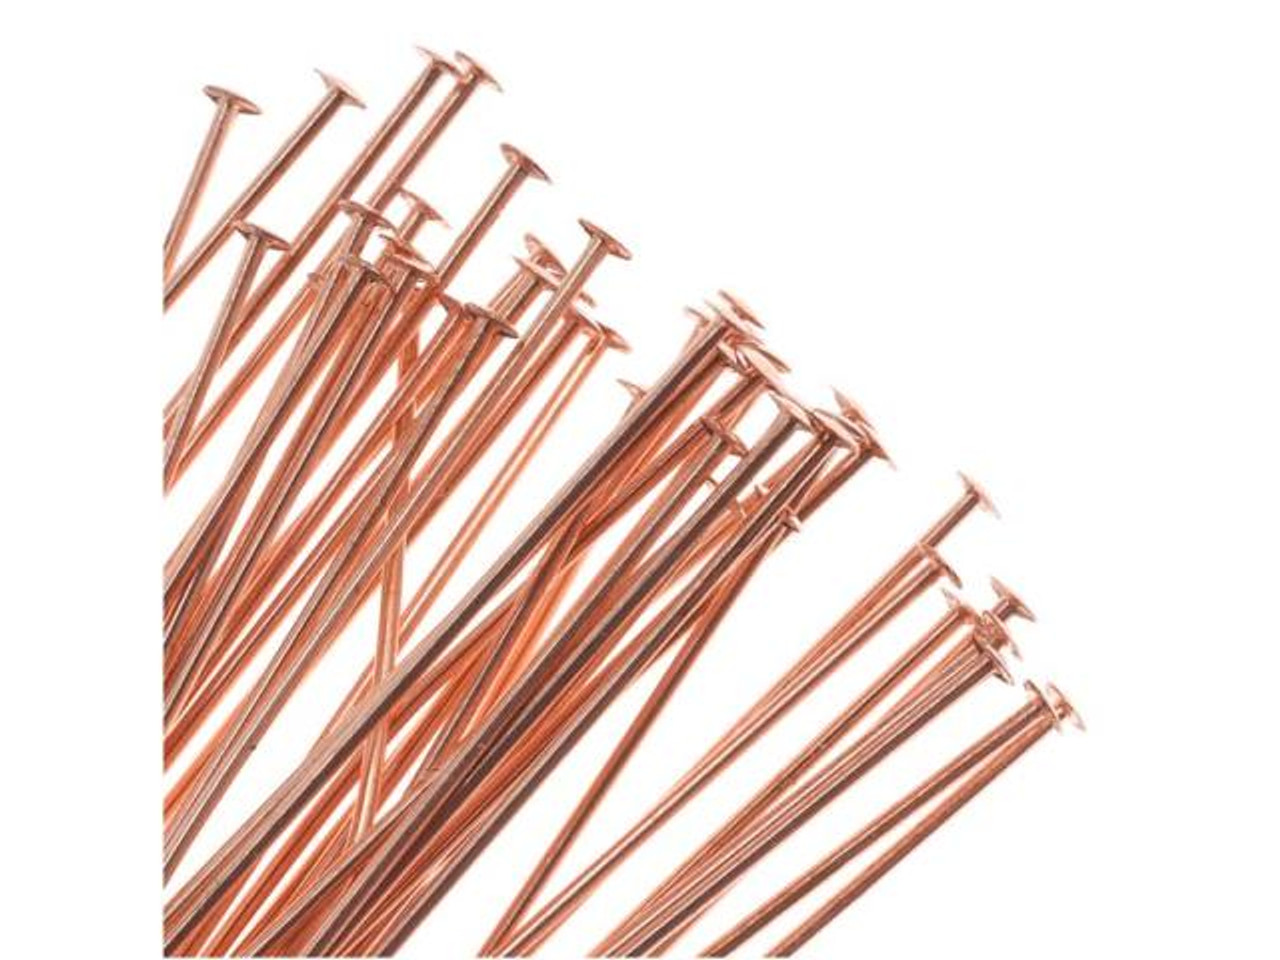 100 Very Thin Gold Plated Head Pins 24 Gauge 1.5 Inch